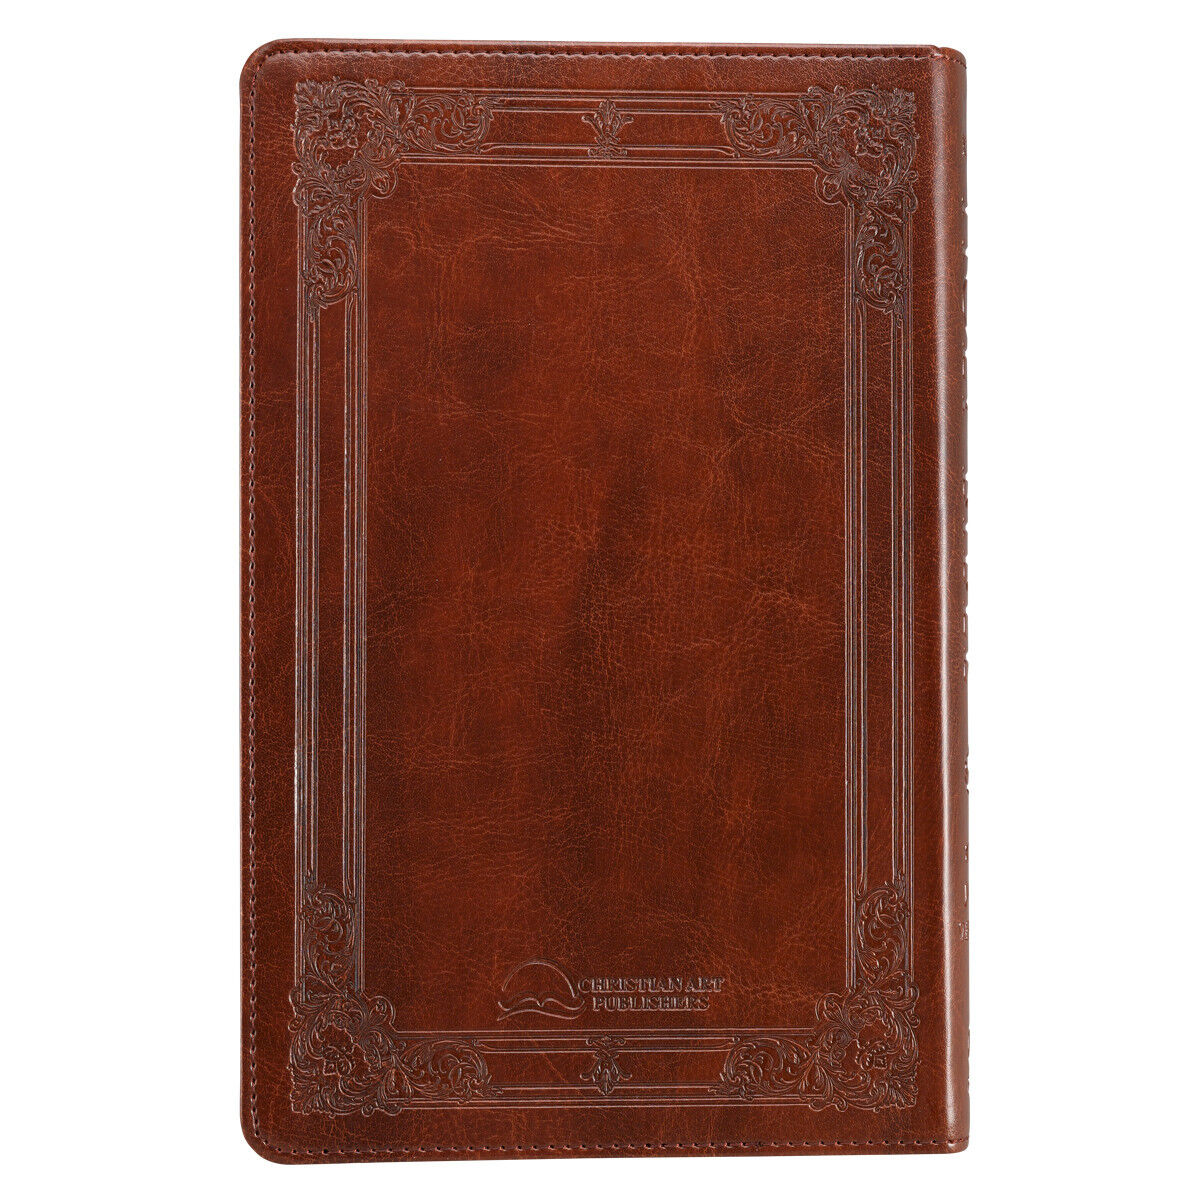  Holy Bible King James Version Thumb Indexed Burgundy Faux Leather Gift Bible Без бренда - фотография #5